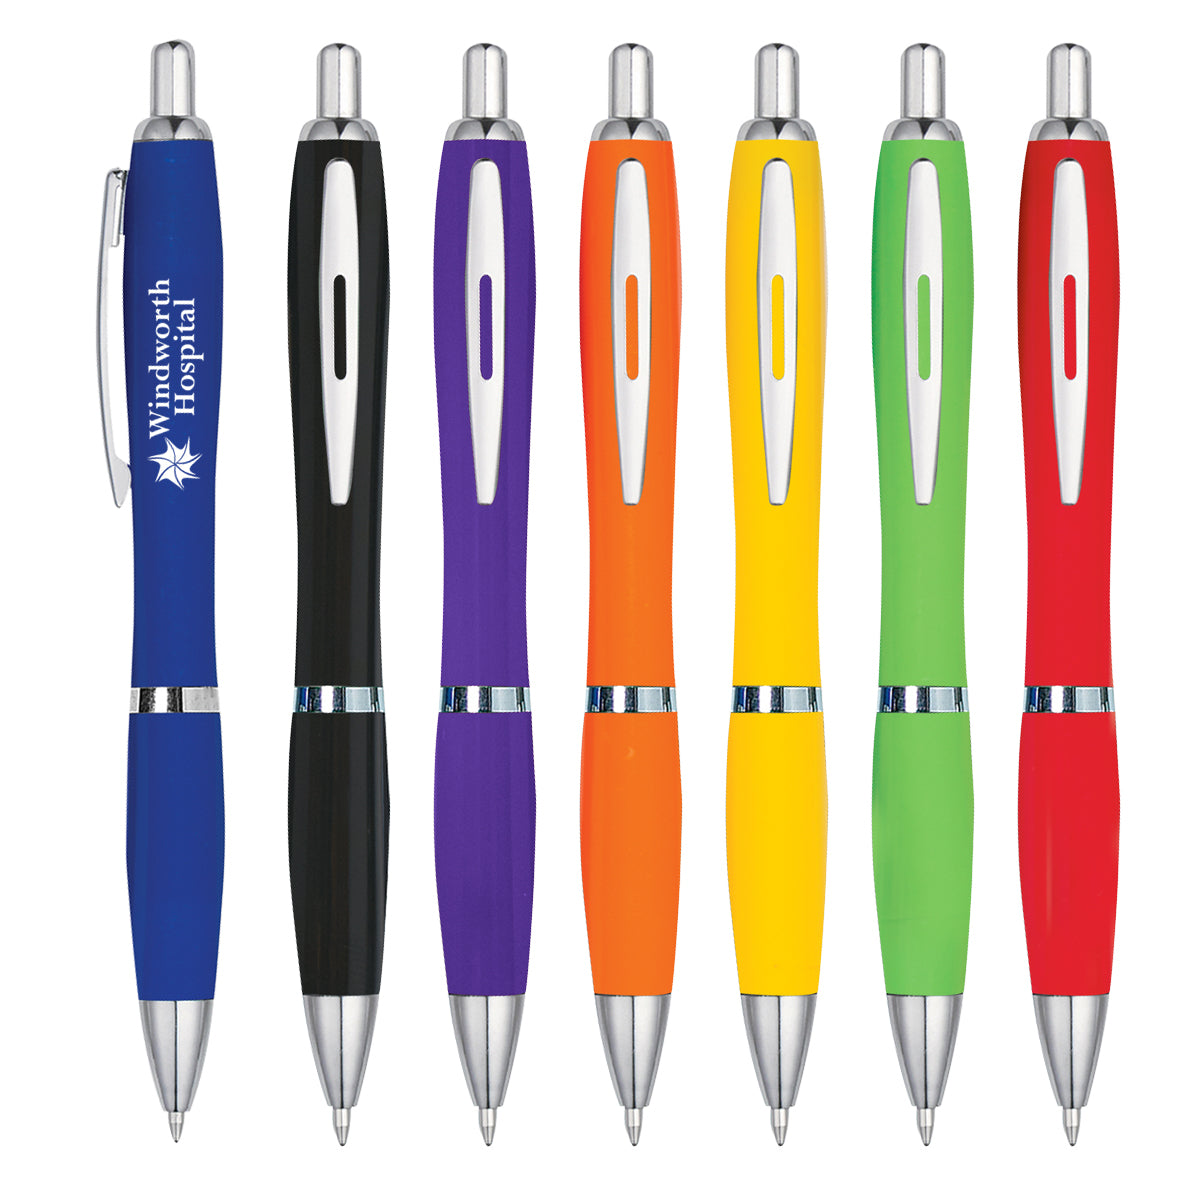 Satin Pen with Antimicrobial Additive